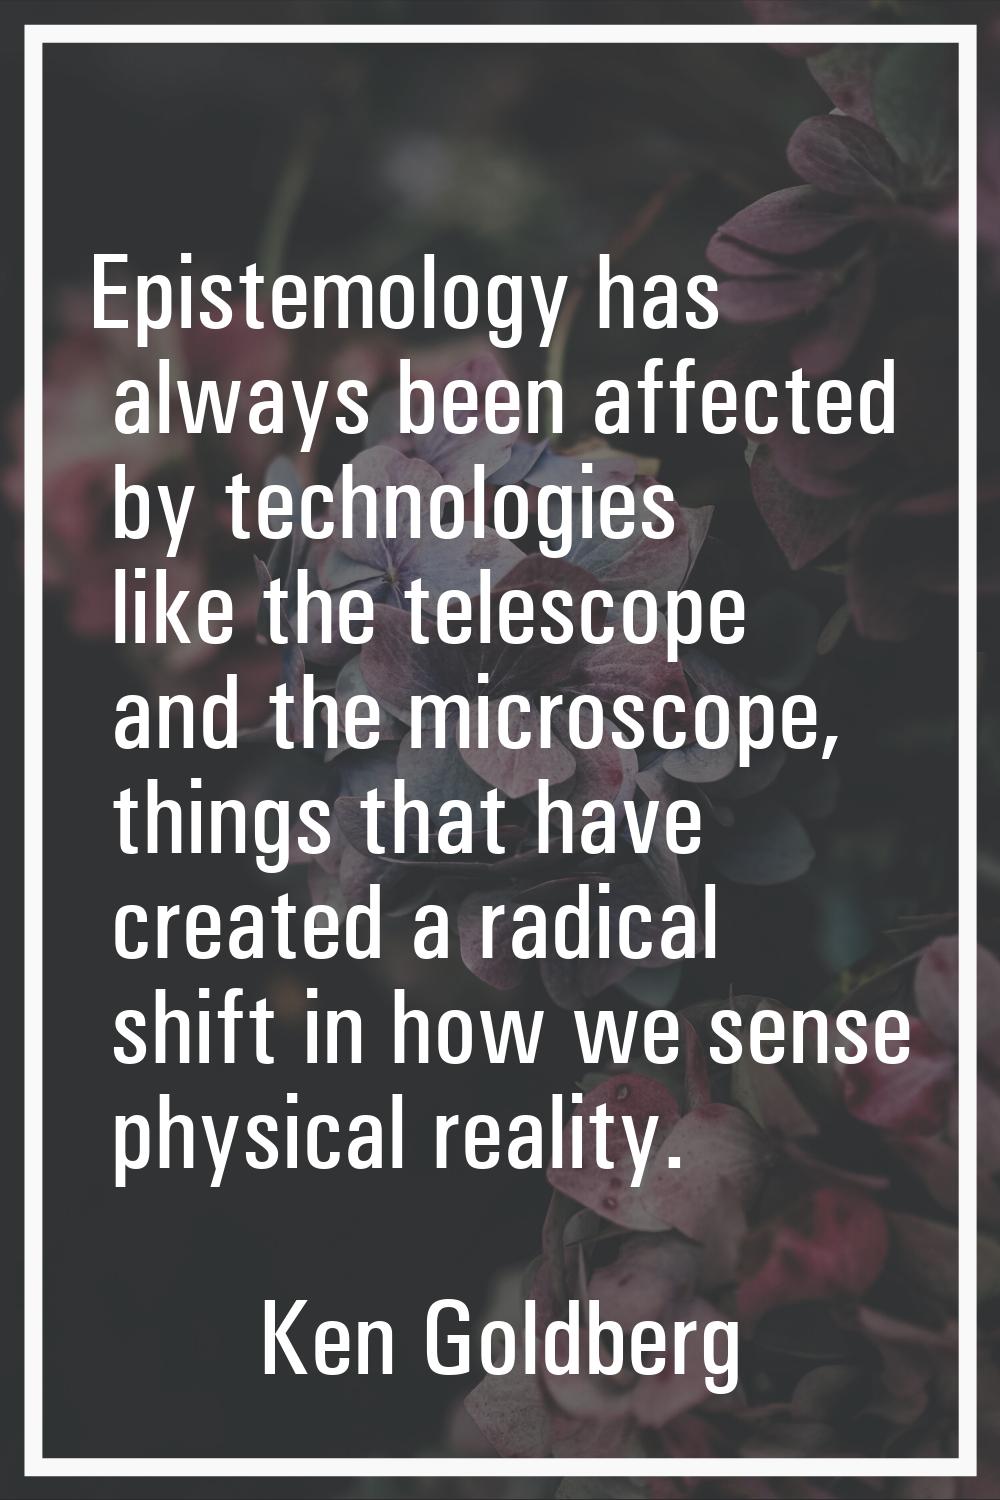 Epistemology has always been affected by technologies like the telescope and the microscope, things